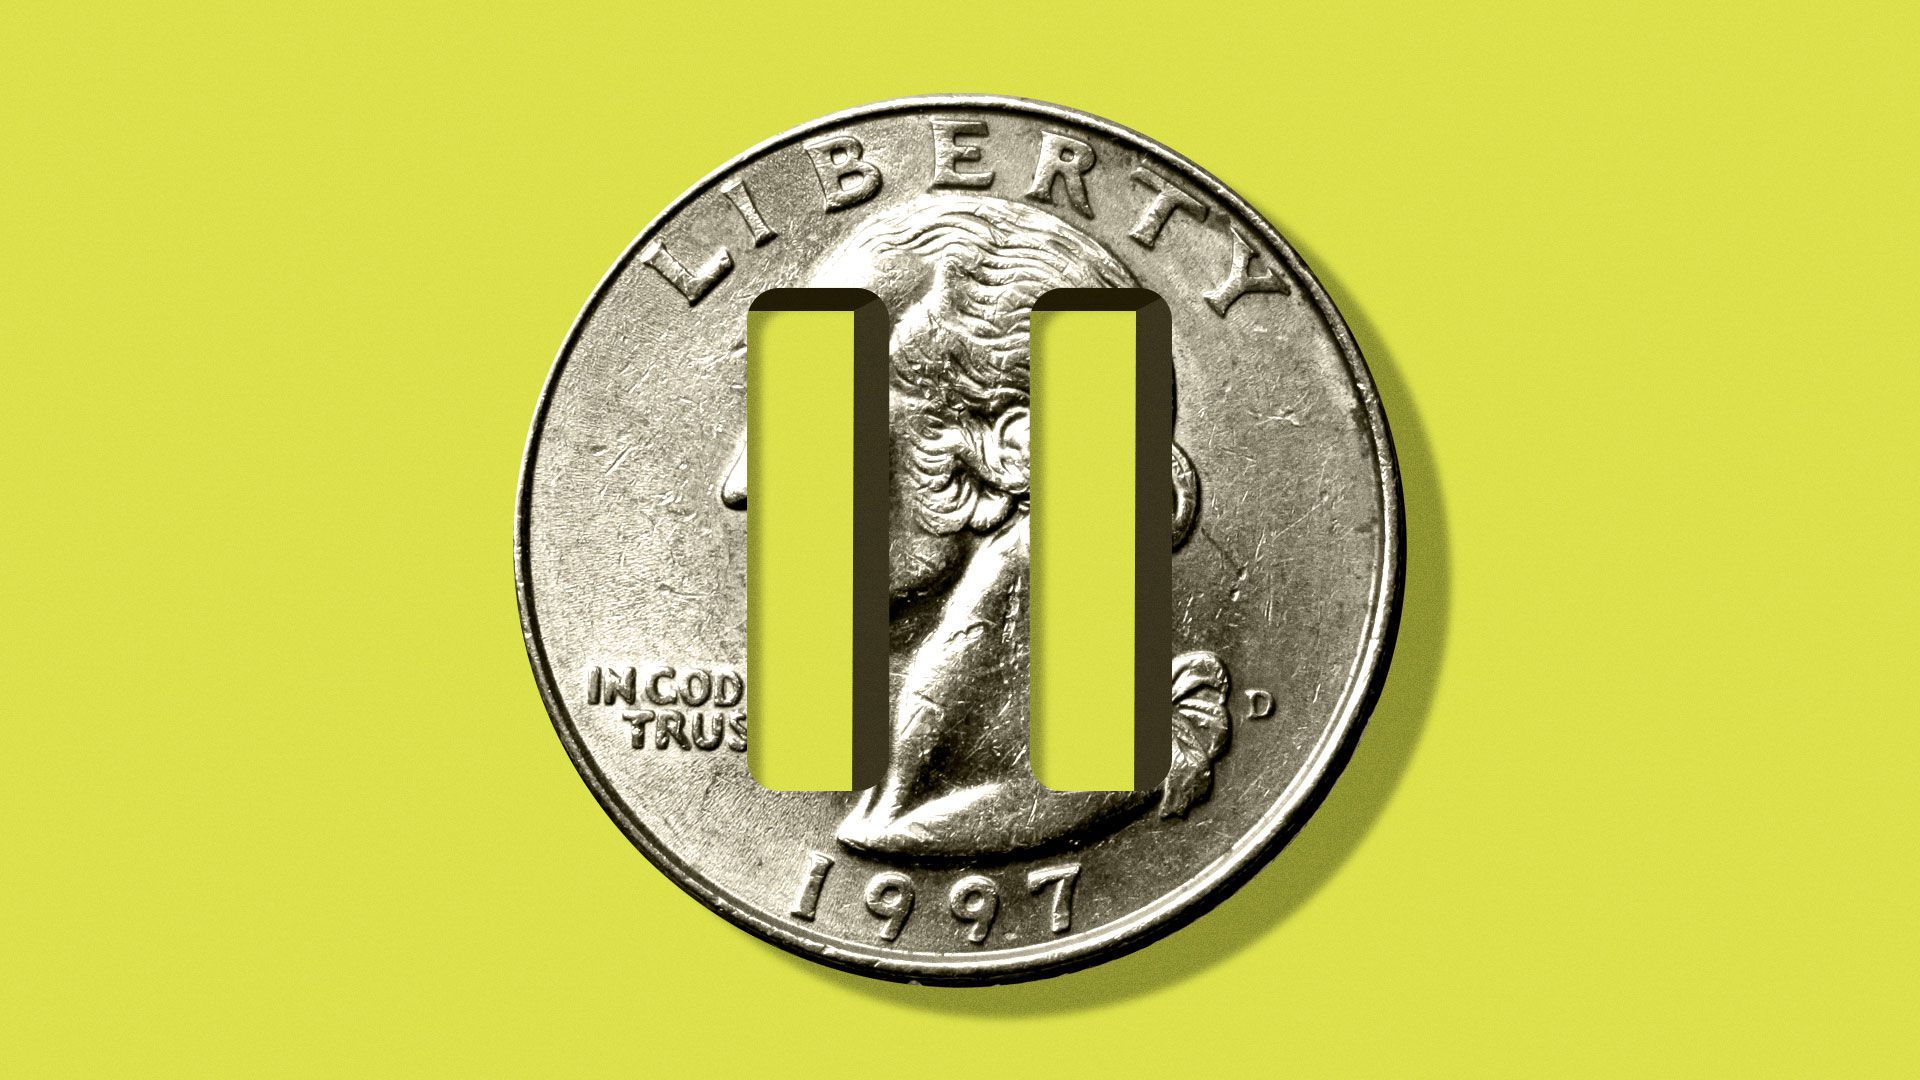 Illustration of quarter with a pause icon cut-out